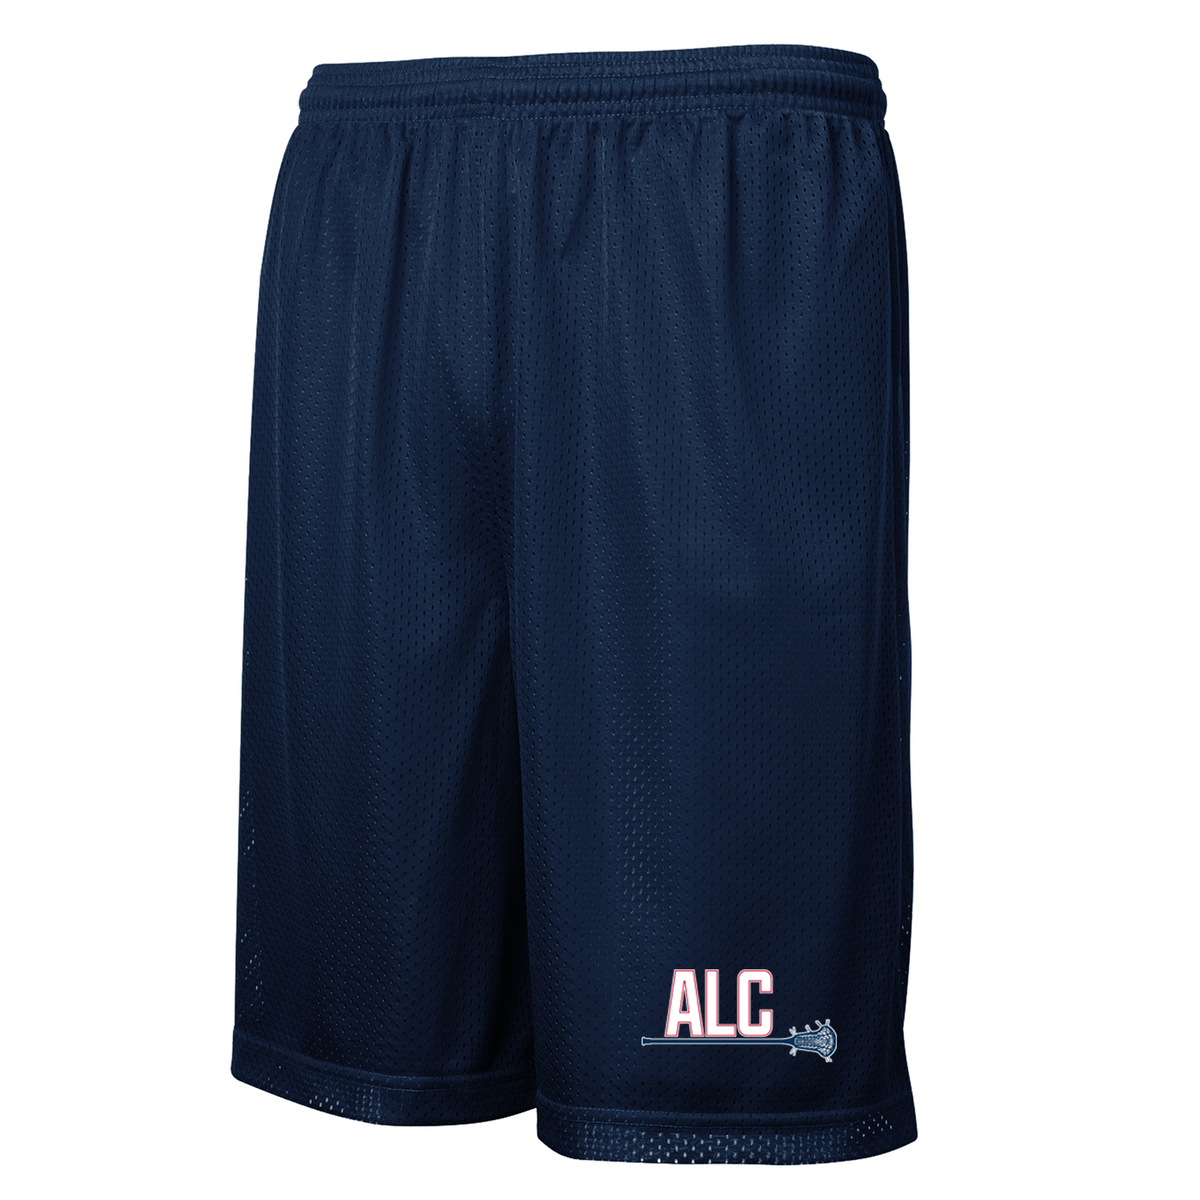 Armonk Lacrosse Club Classic Mesh Shorts (Youth & Adult)